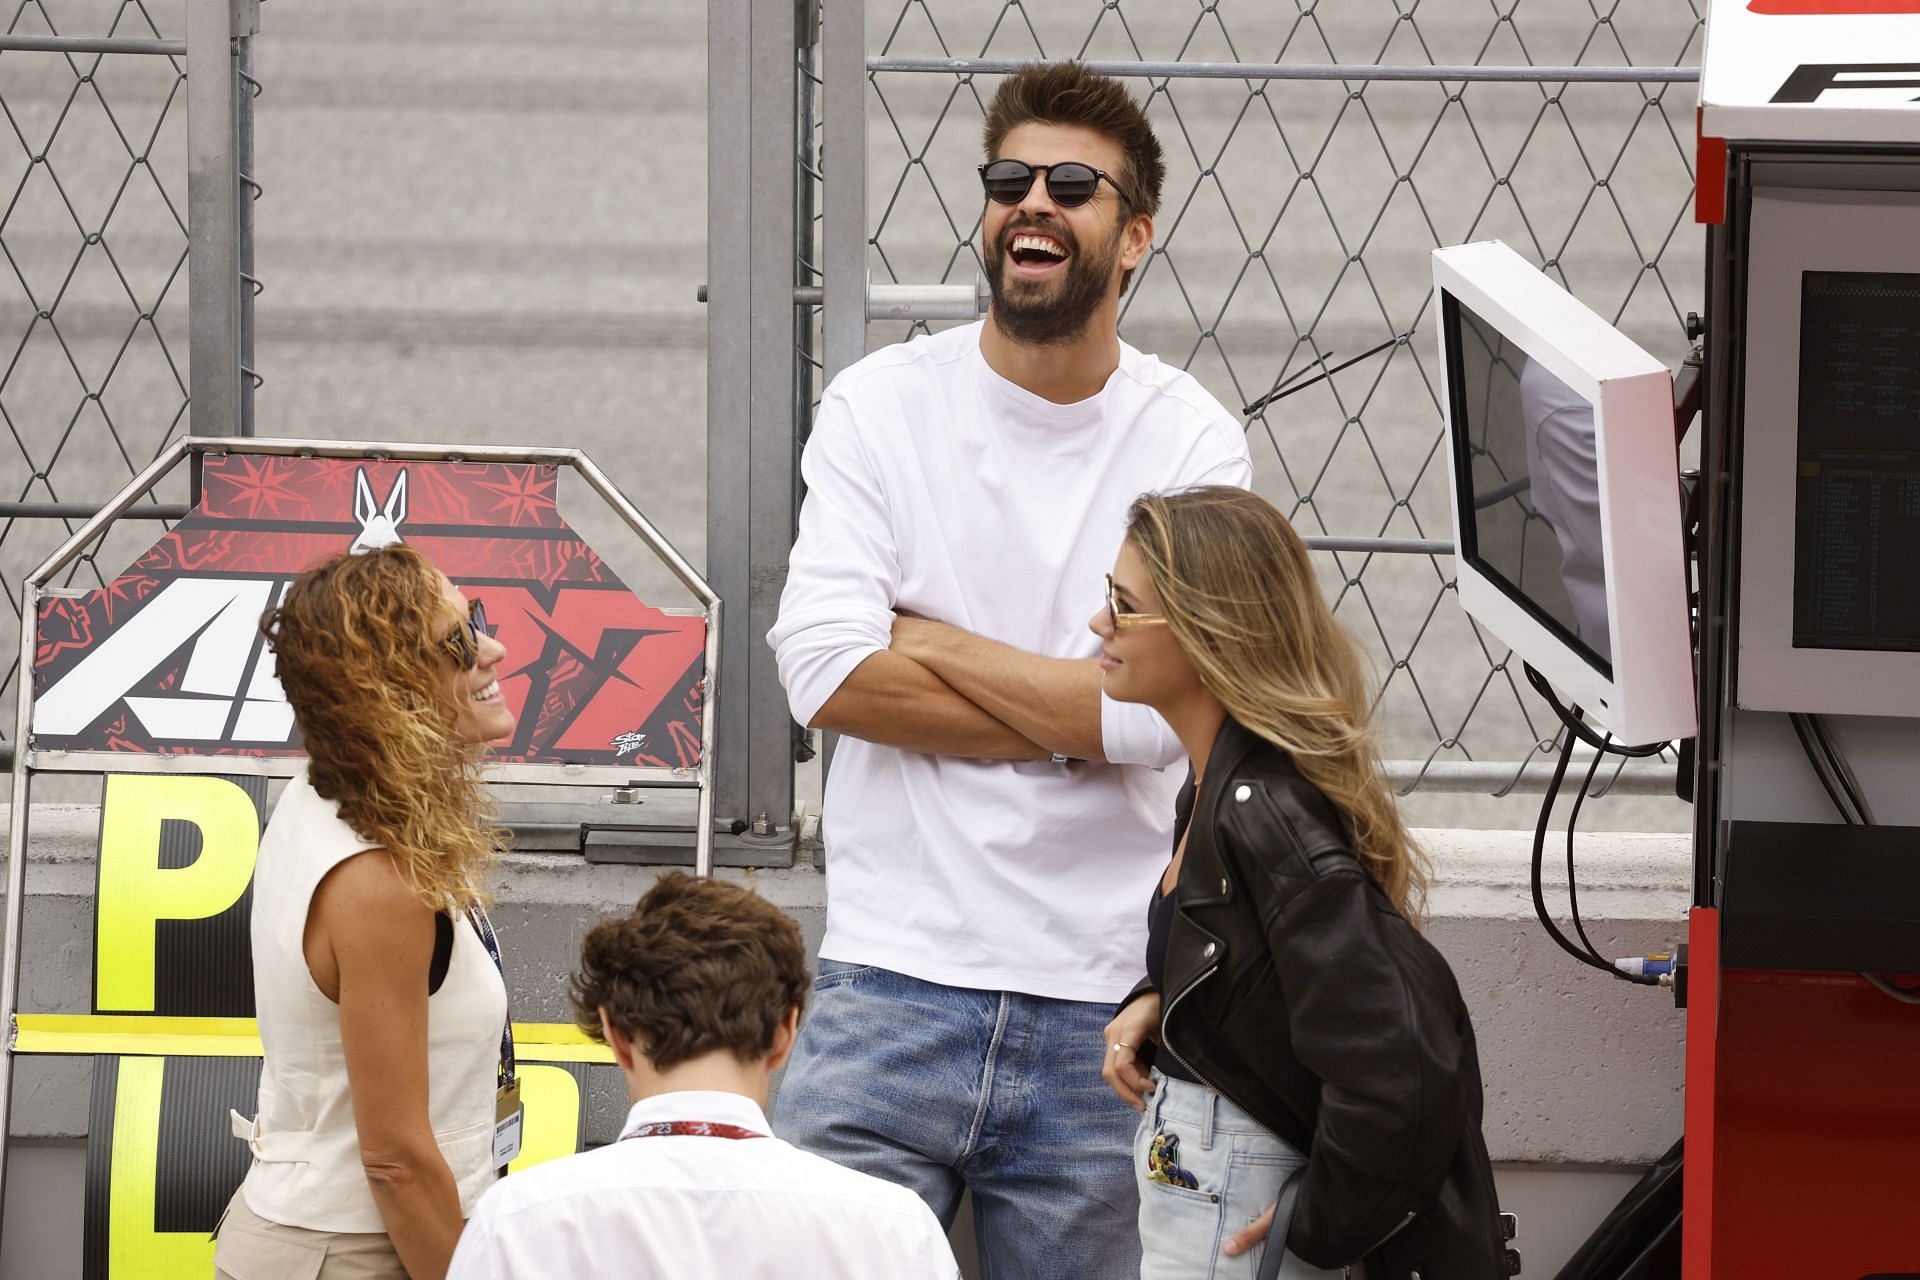 Gerard Pique pictured at the Spain GP Motorcycle Racing